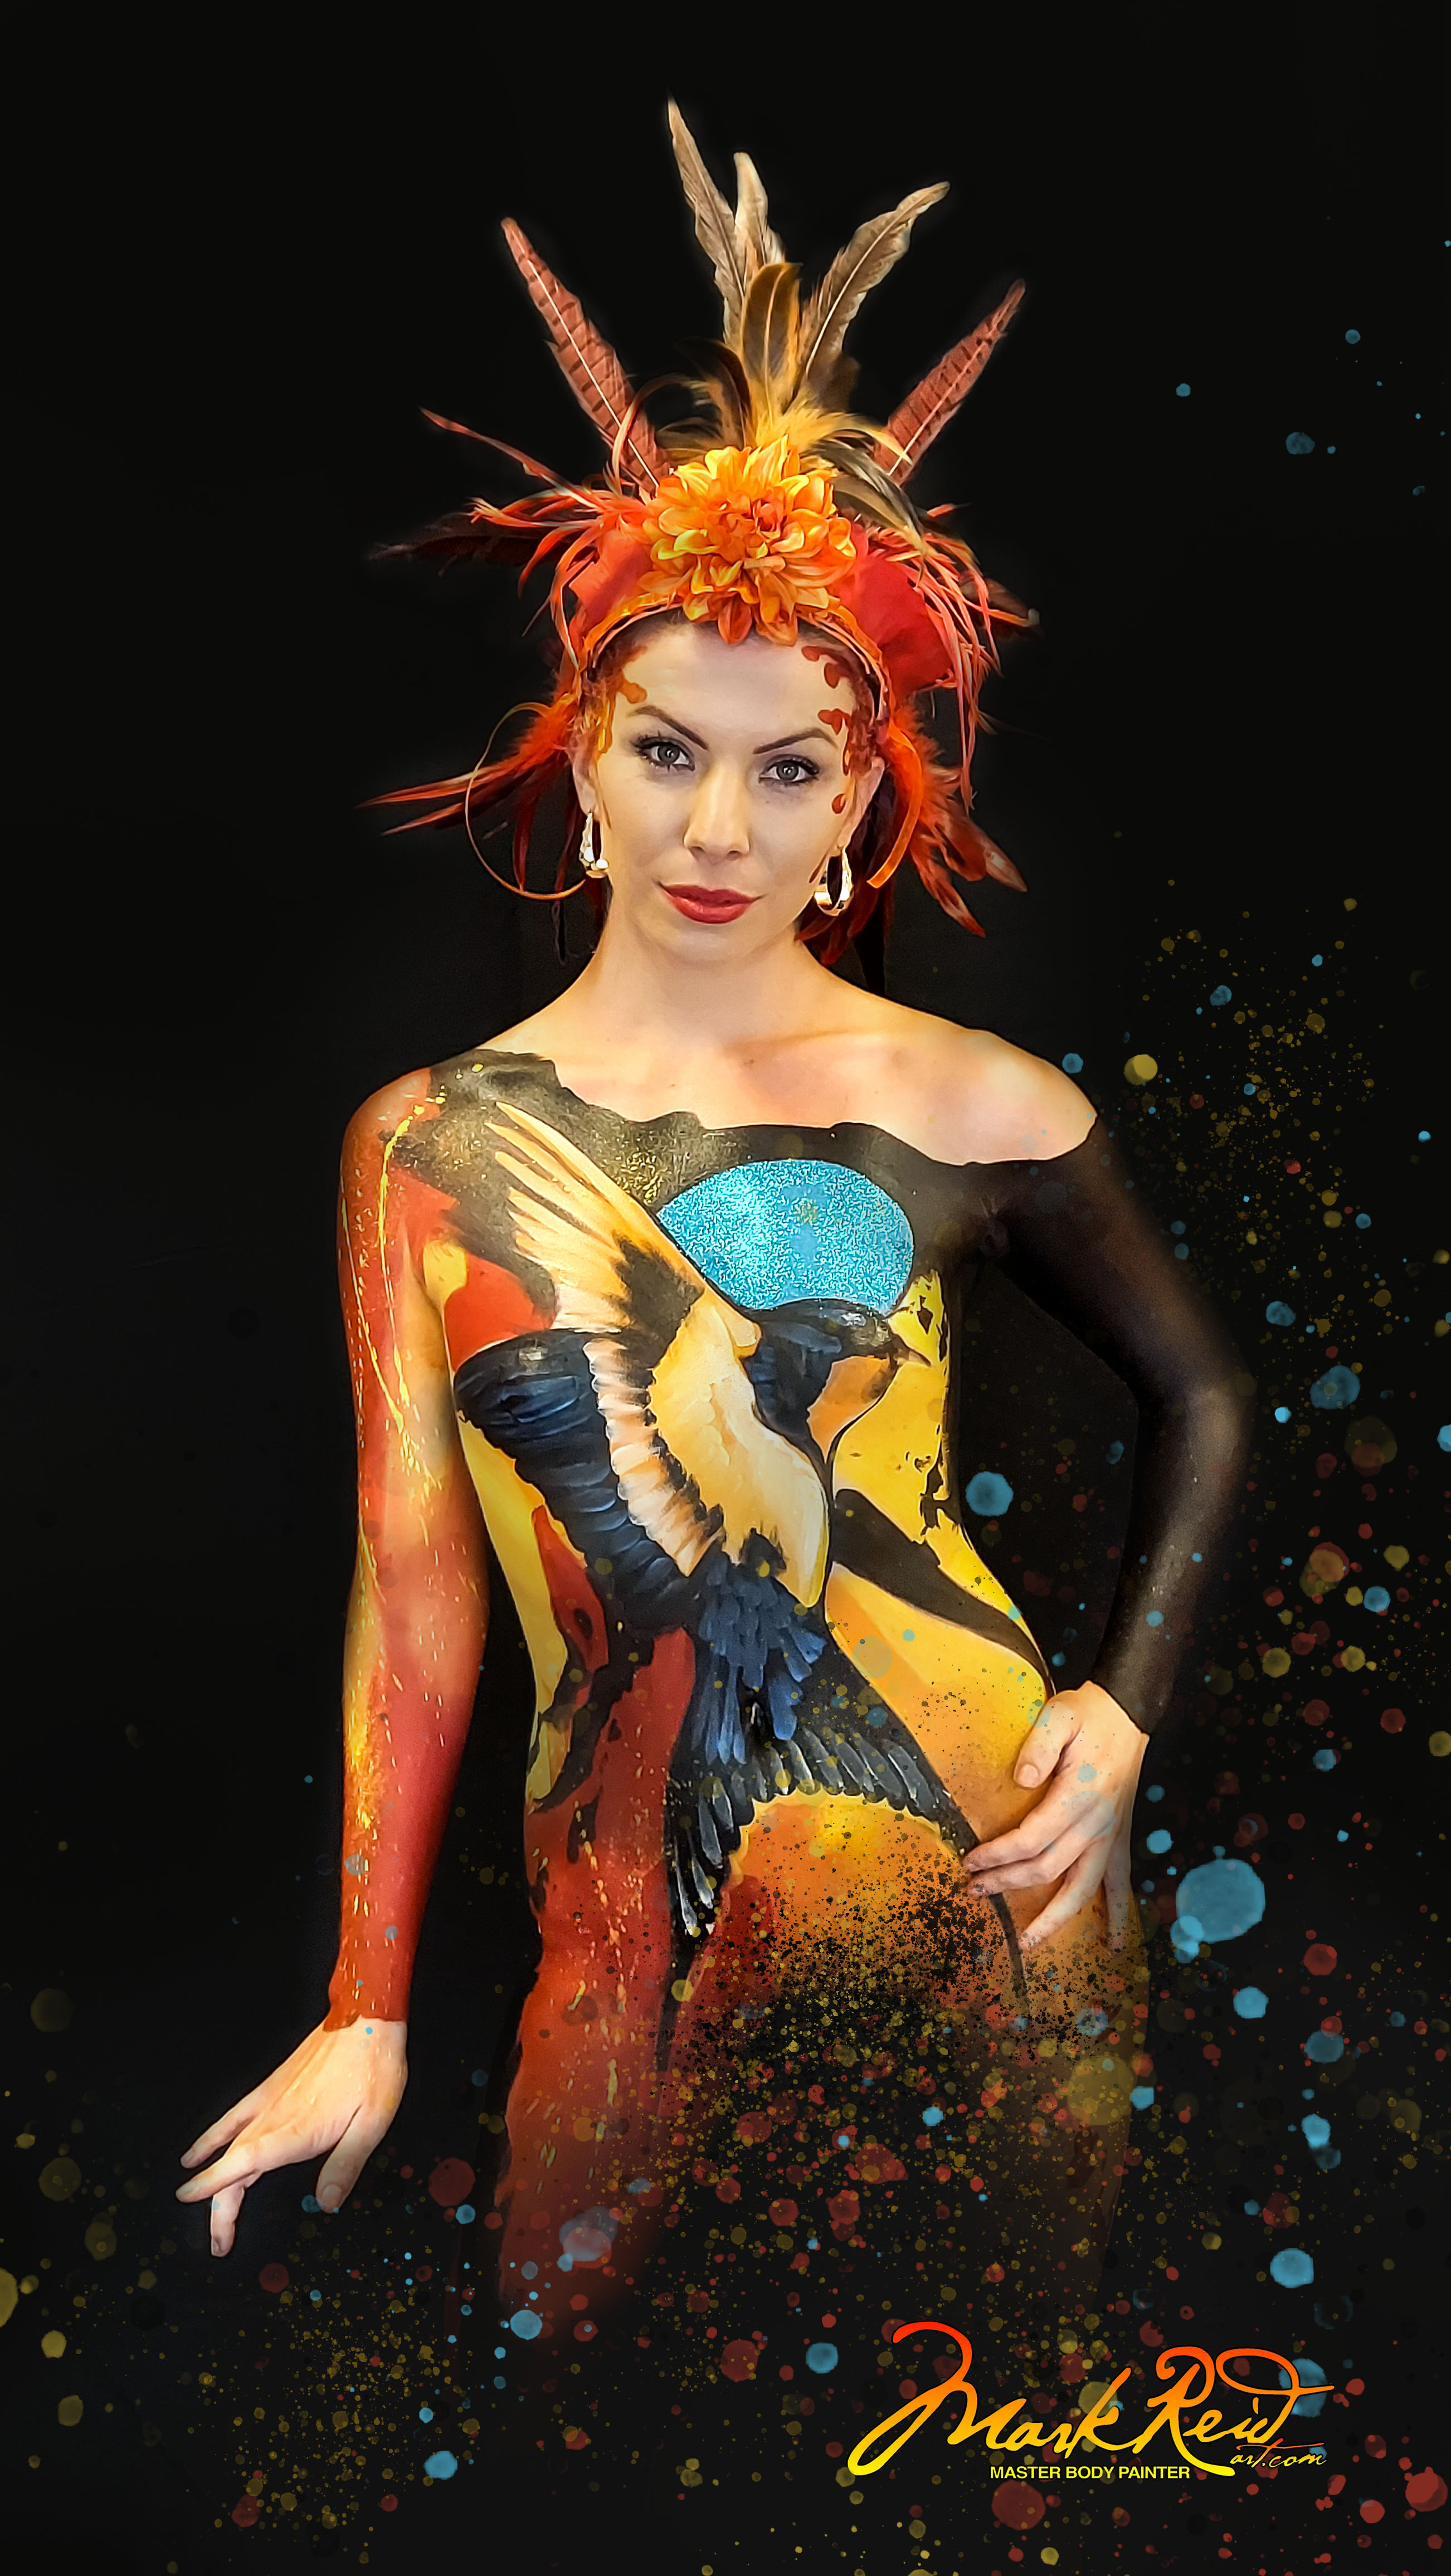 Woman in full body paint that is extremely detailed and features a side view of a flying barn swallow.  Very colorful painting and she is wearing a headdress with lots of colorful feathers.